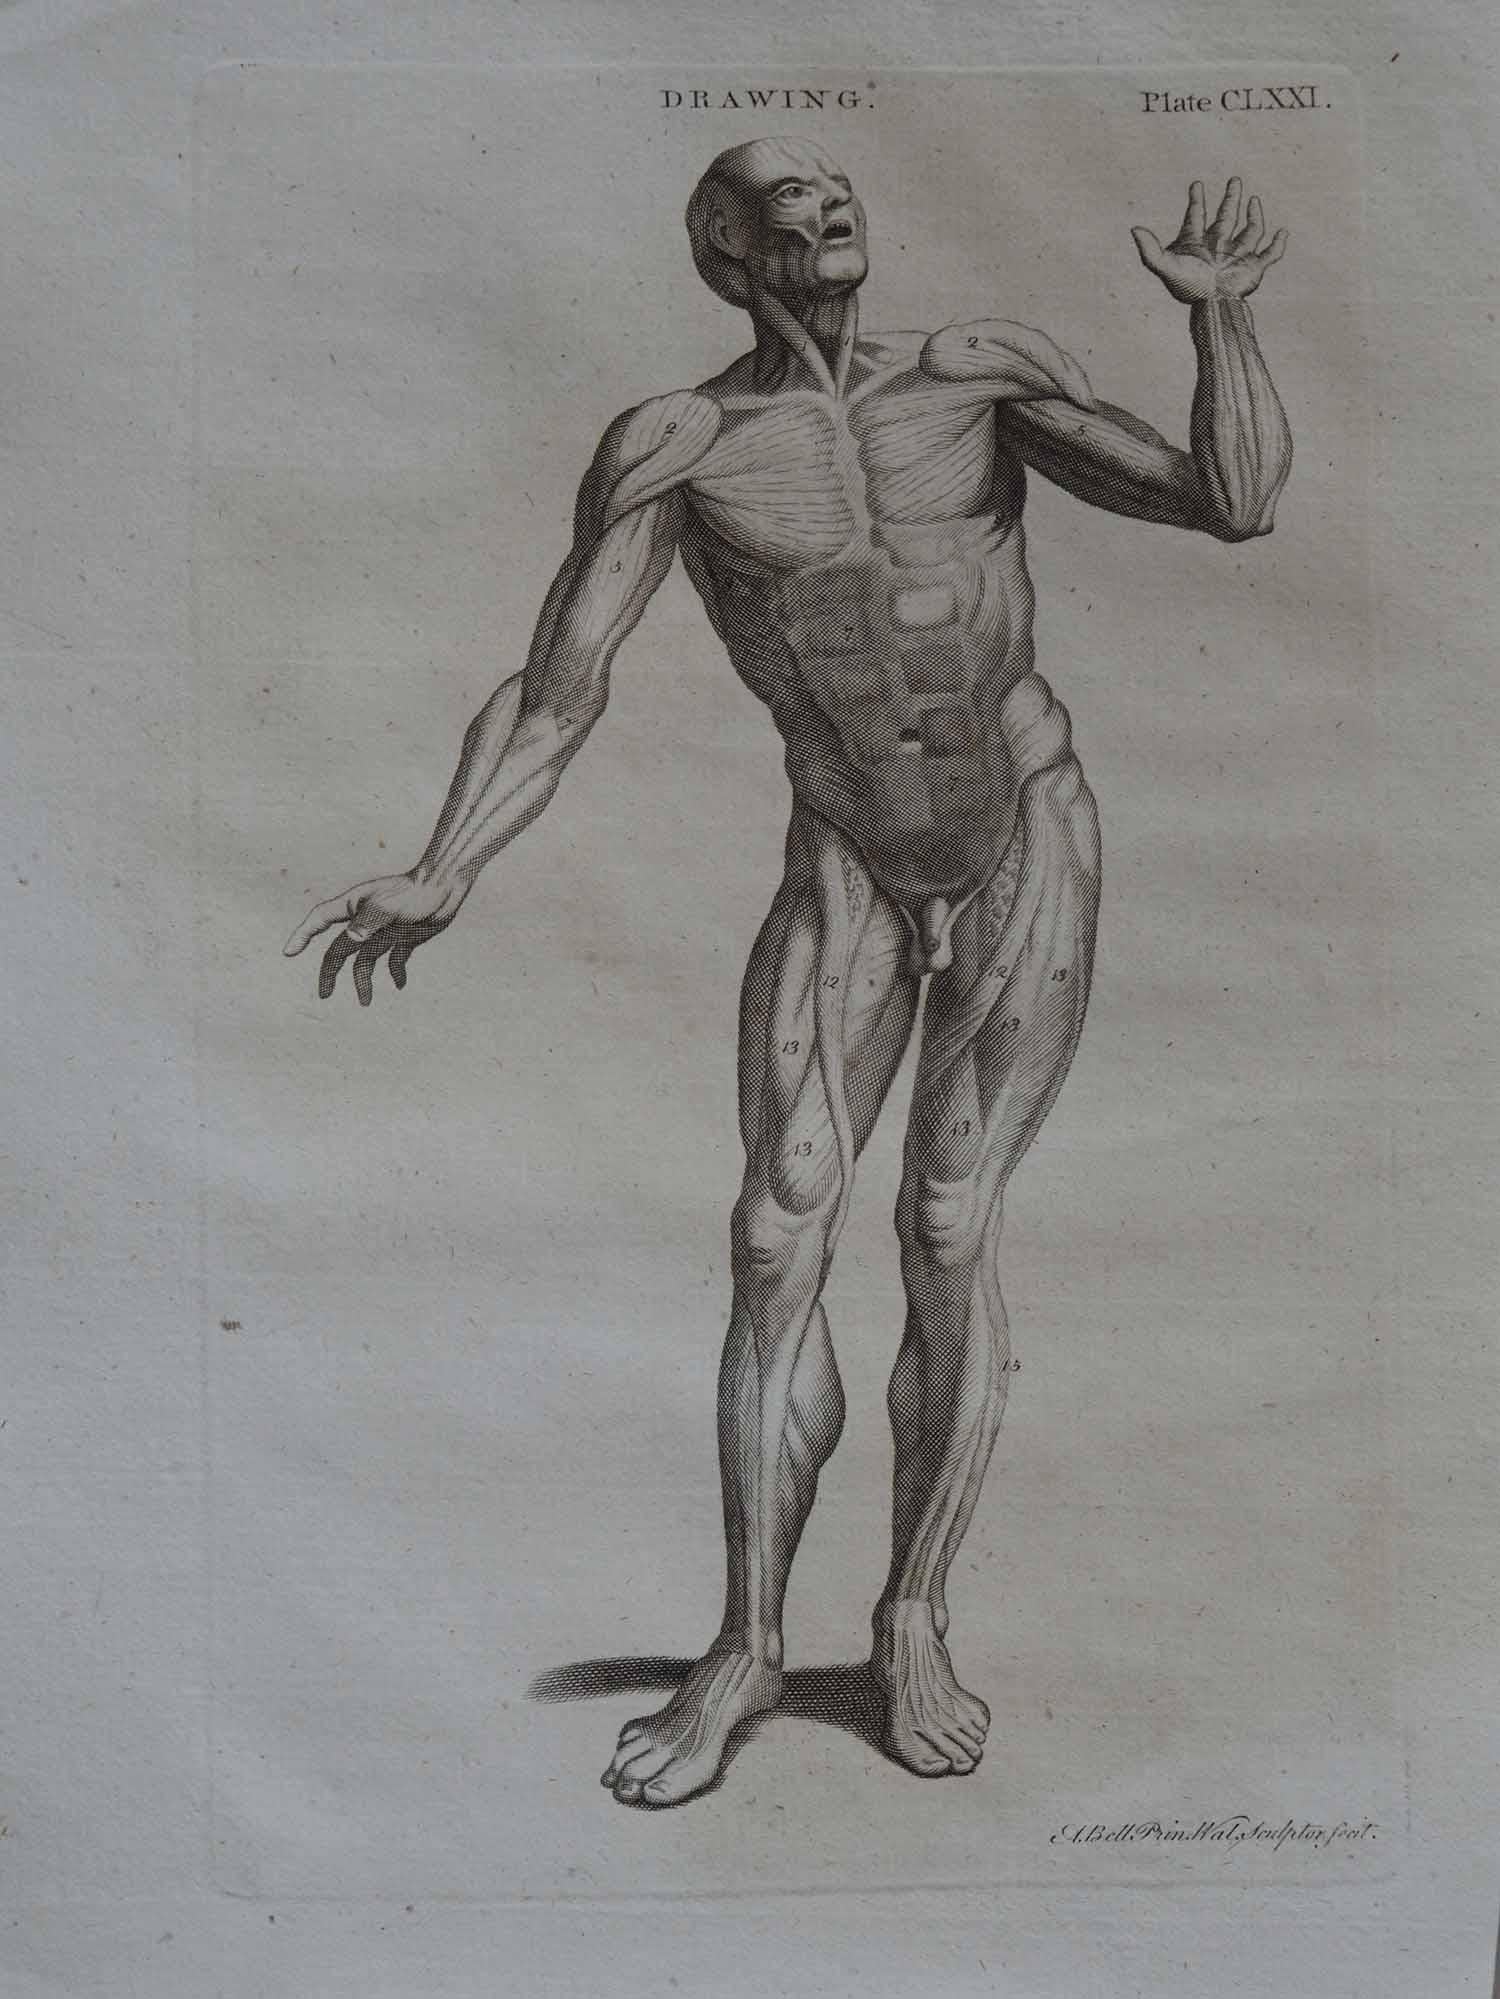 Georgian Set of 9 Anatomical Prints by A. Bell, 18th Century